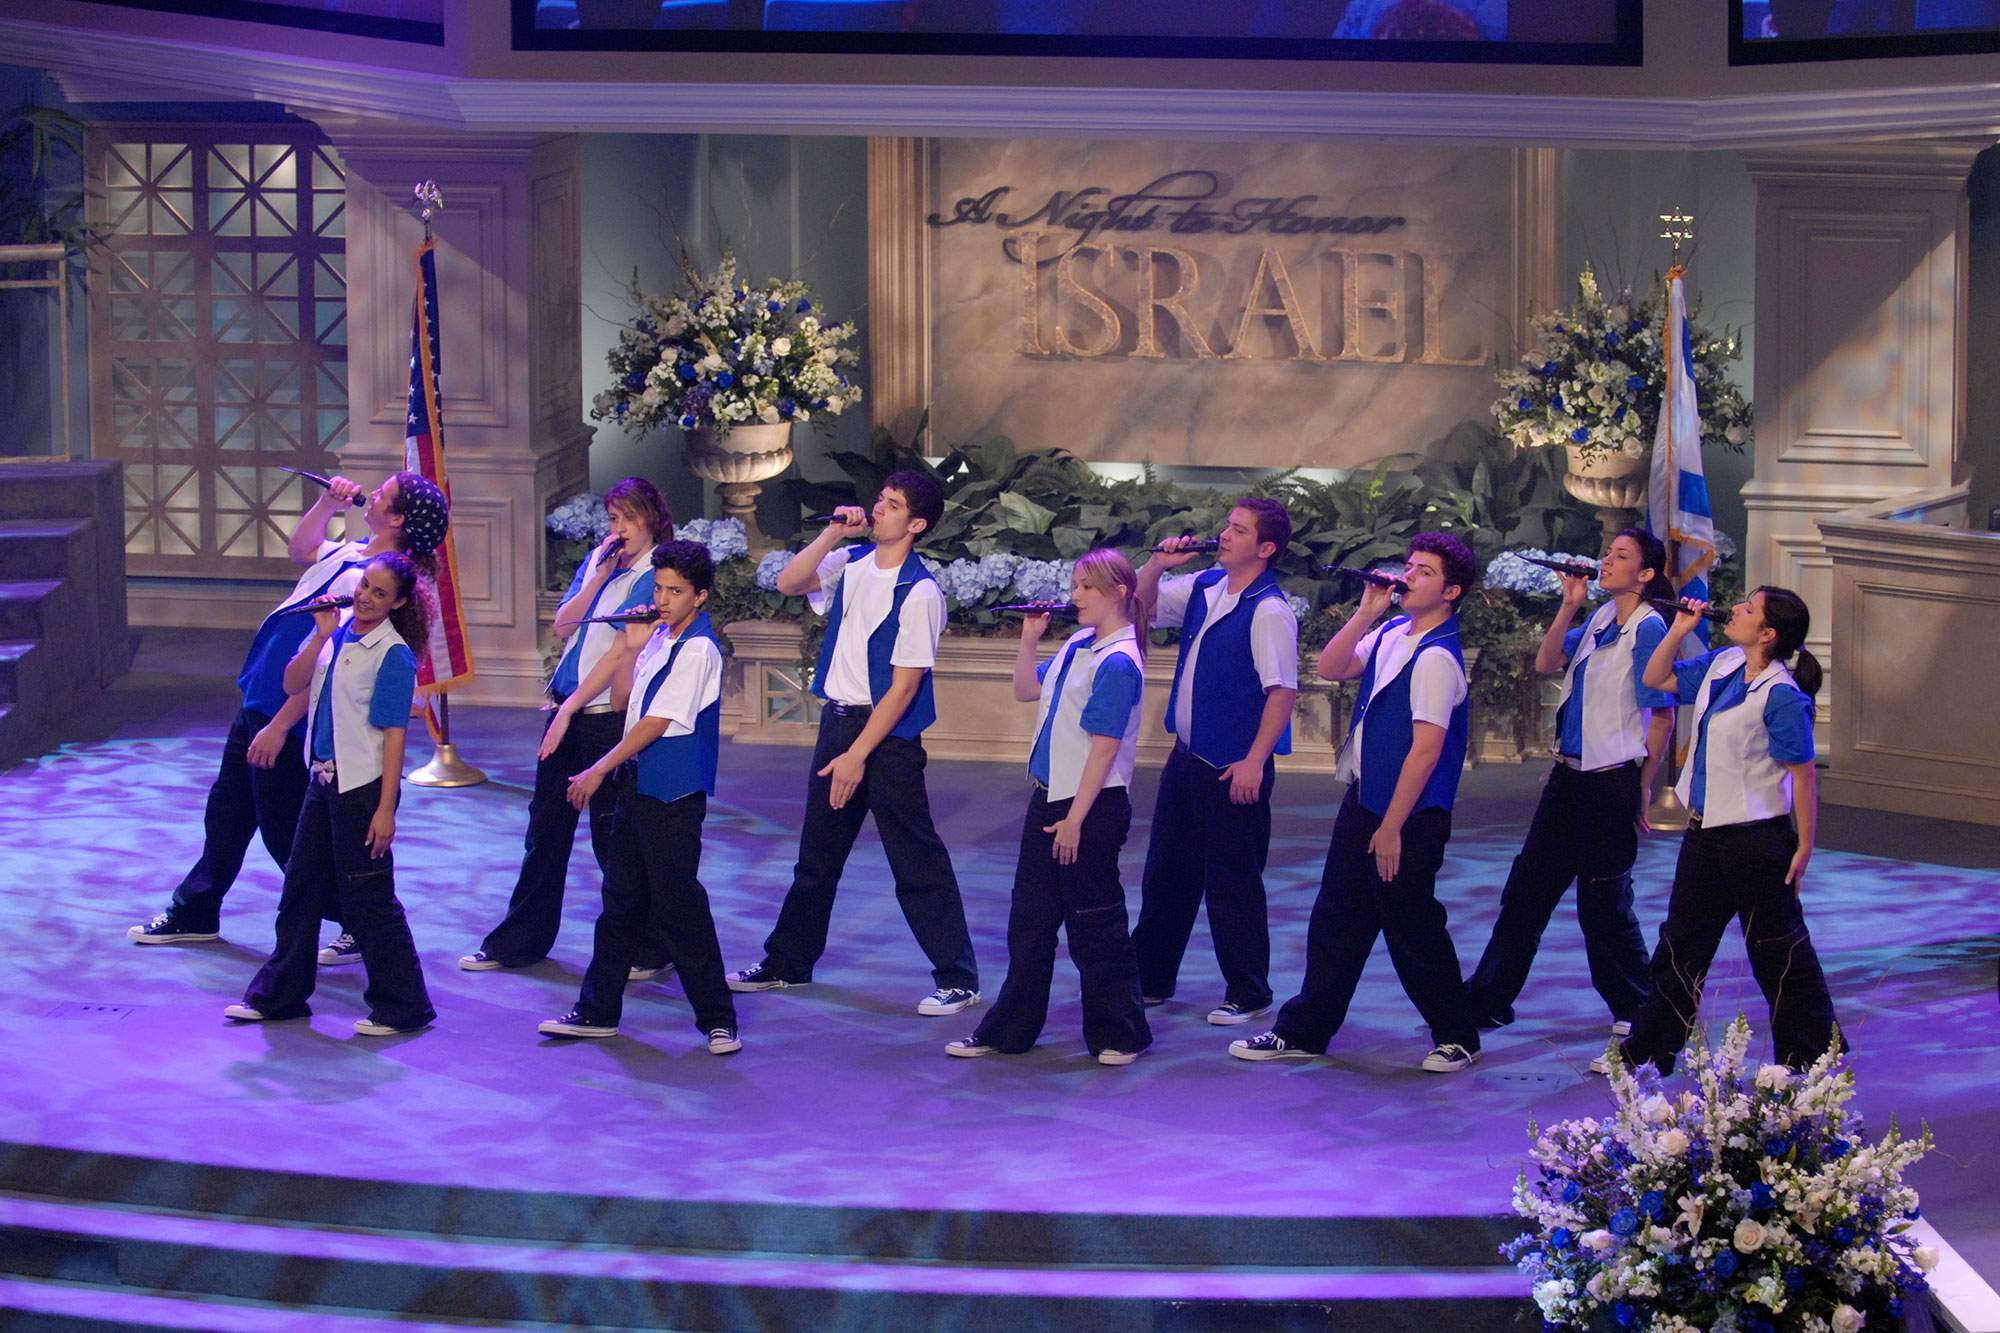 The “Celebrate Ariel” Youth Performance Troupe